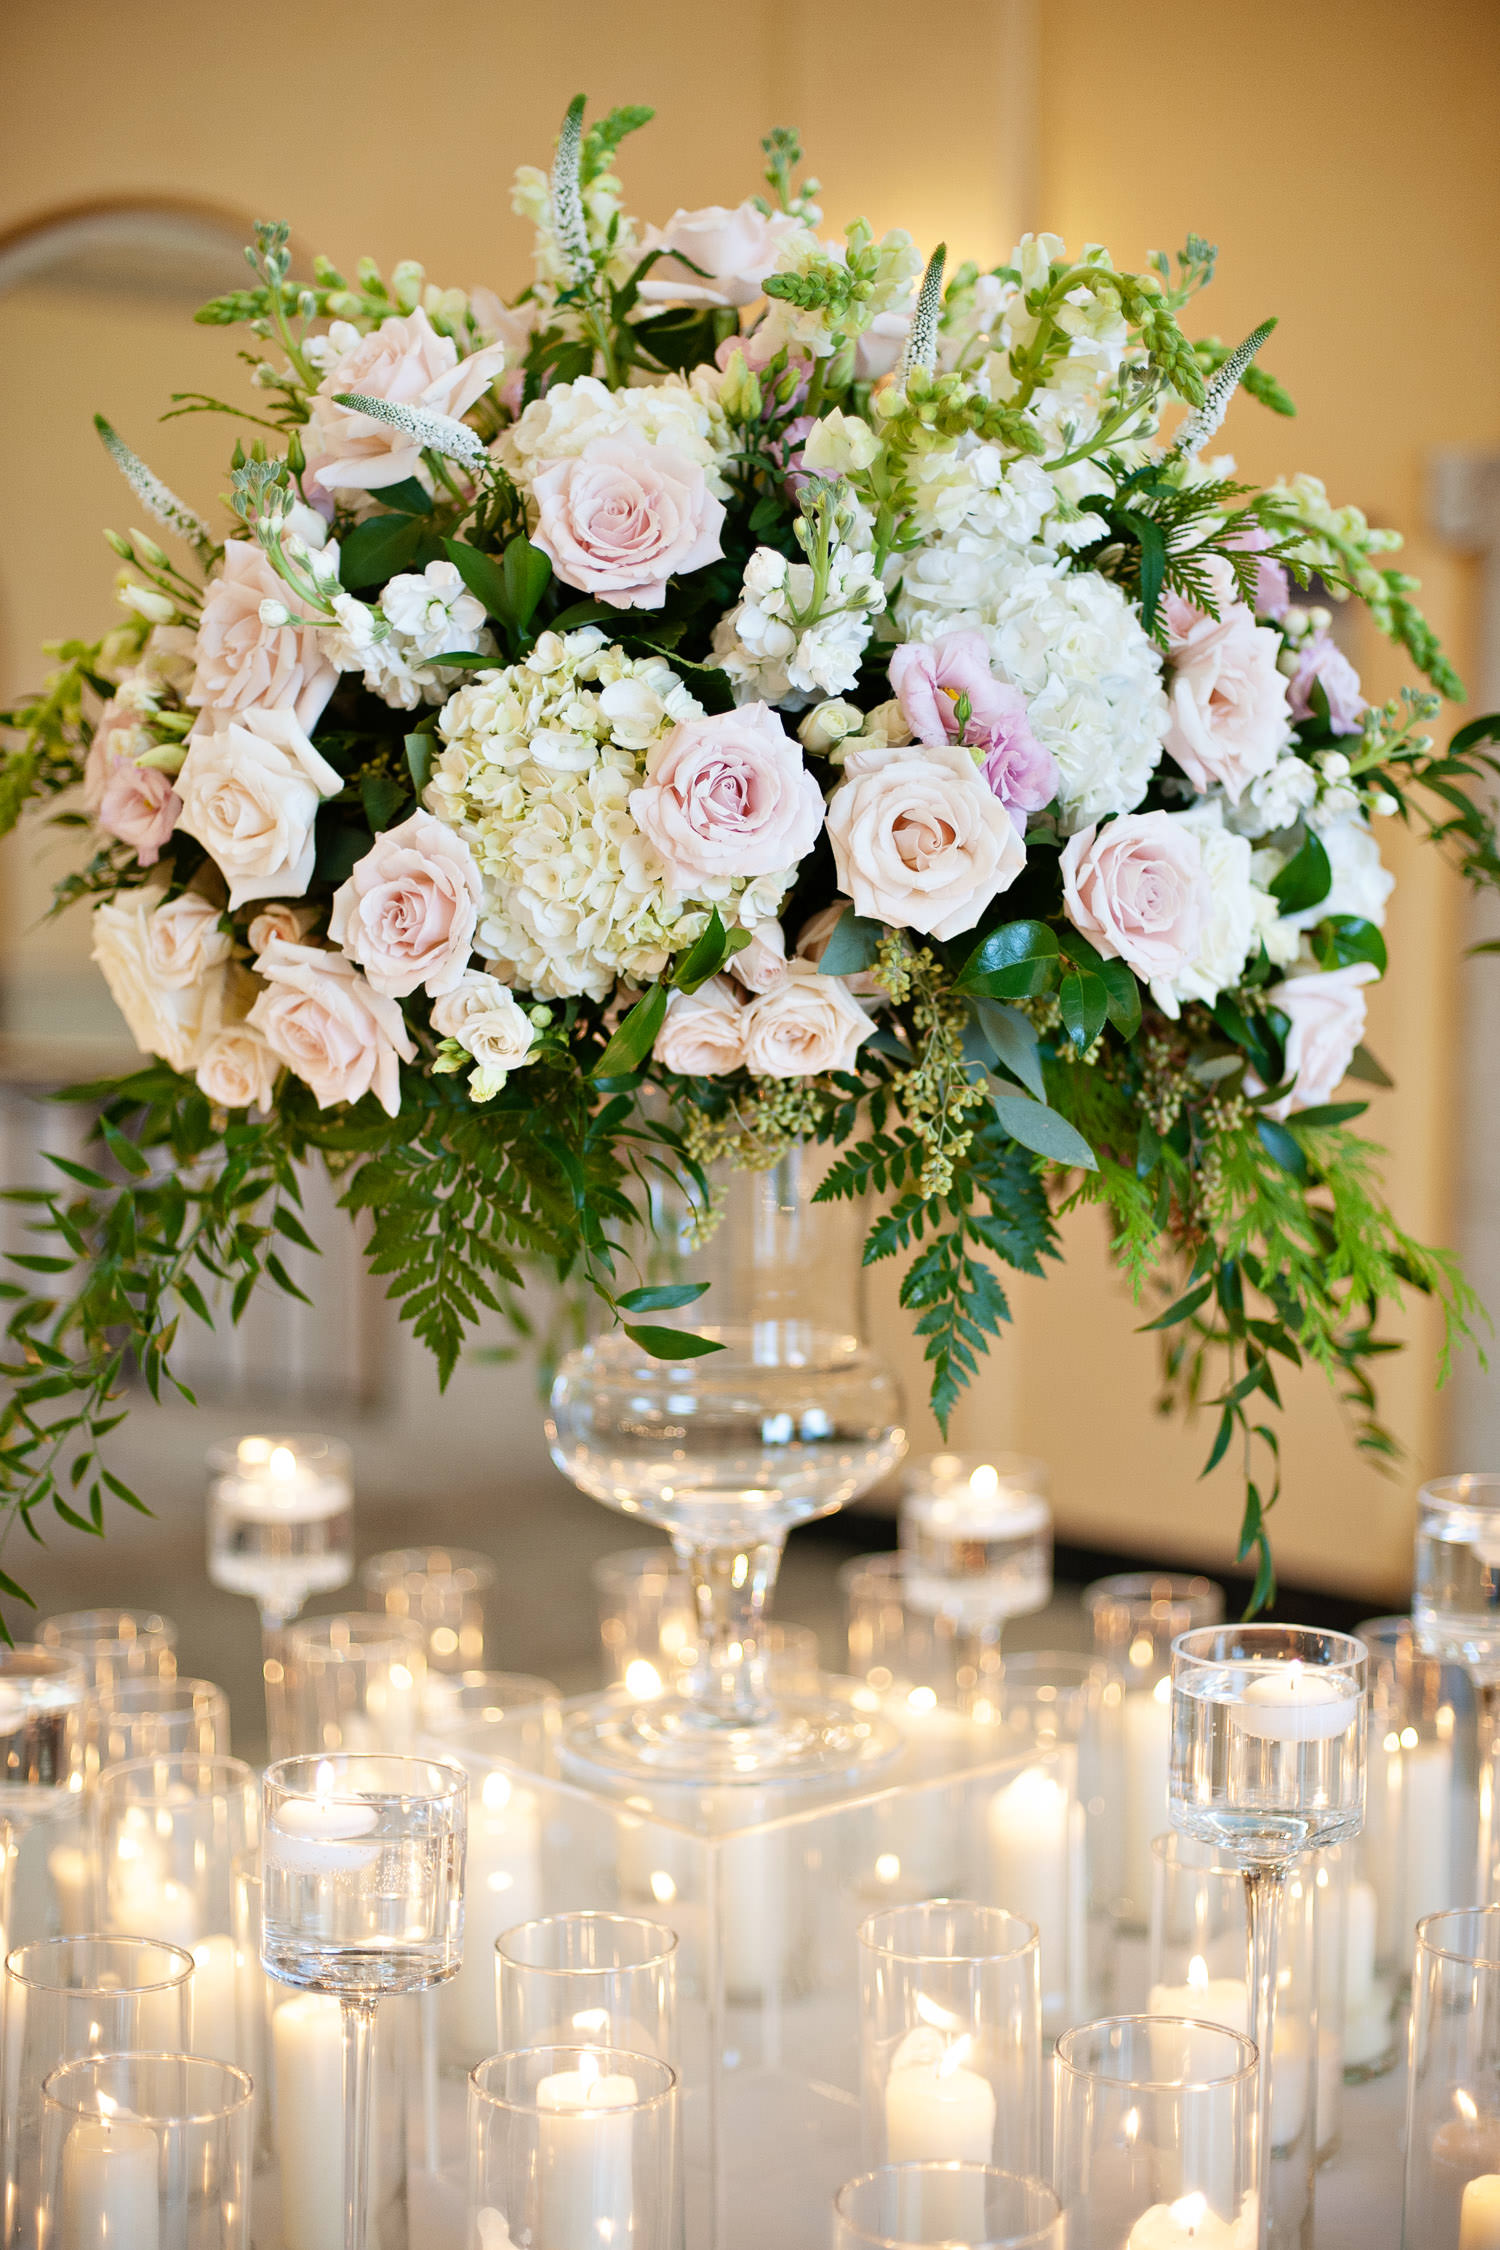 Floral centrepiece at destination wedding at the Fairmont Banff Springs Hotel captured by Tara Whittaker Photography